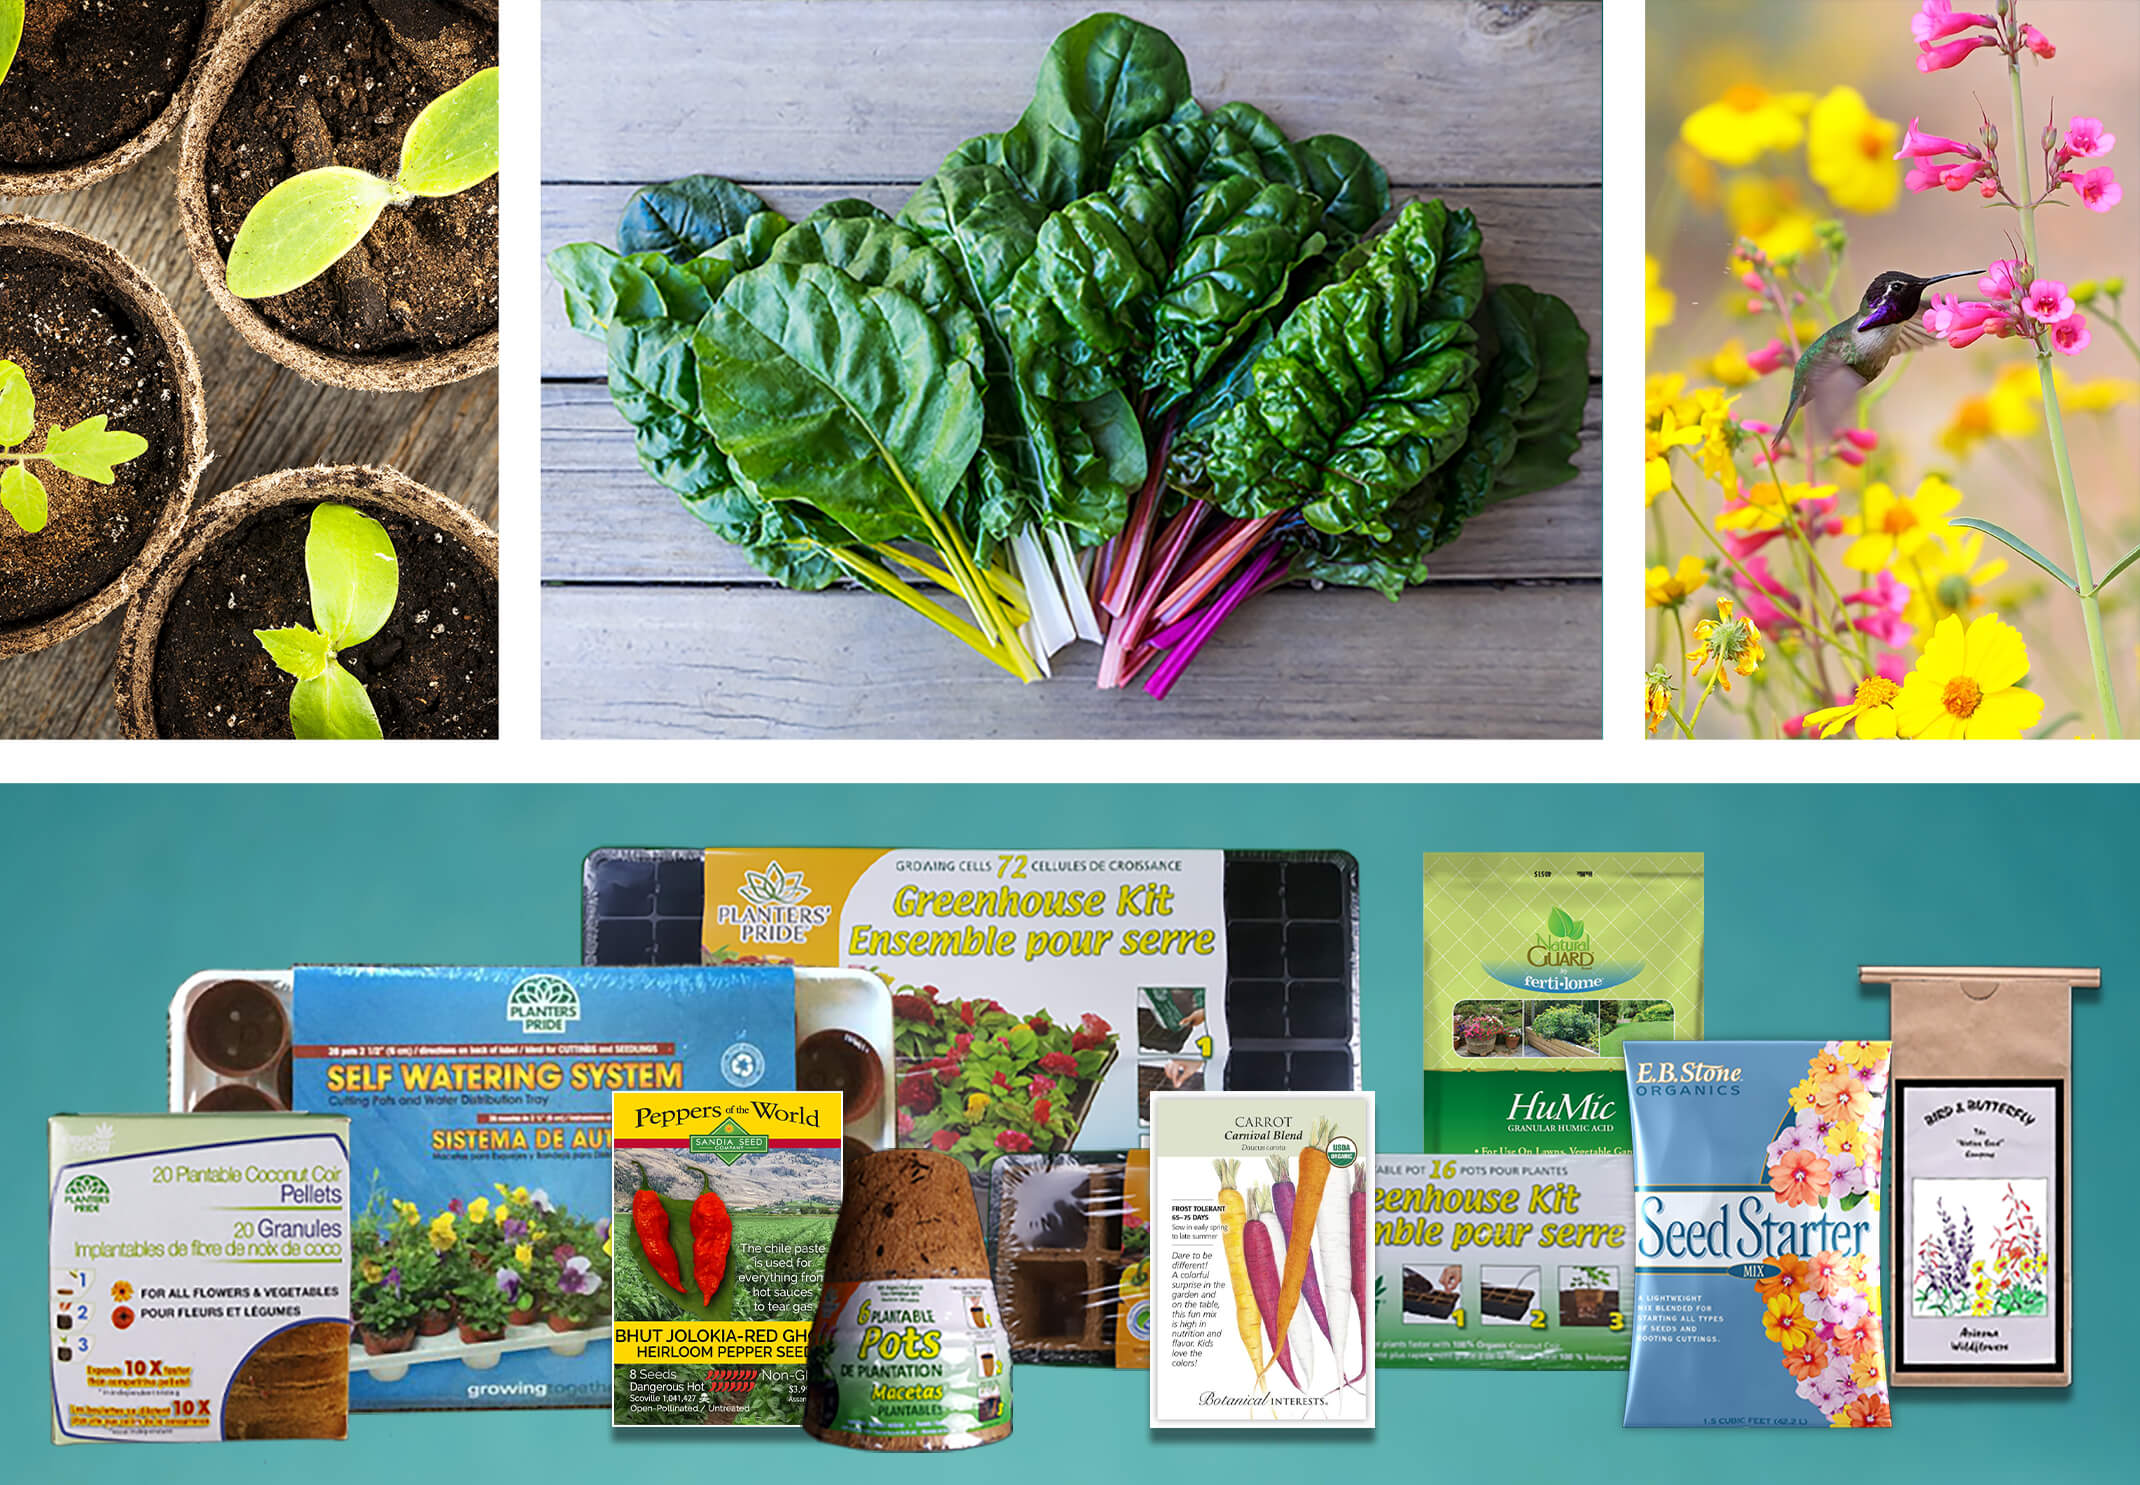 2 colums of images - the top made up of 3: plant starts in round plantable pots; rainbow chard on a wooden table and a hummingbird enjoying a pink flower with yellow flowers in the background. The second column is a variety of tools to grow from seed, including pulp pots, seeds, seed trays, soils and more--all on a blue background